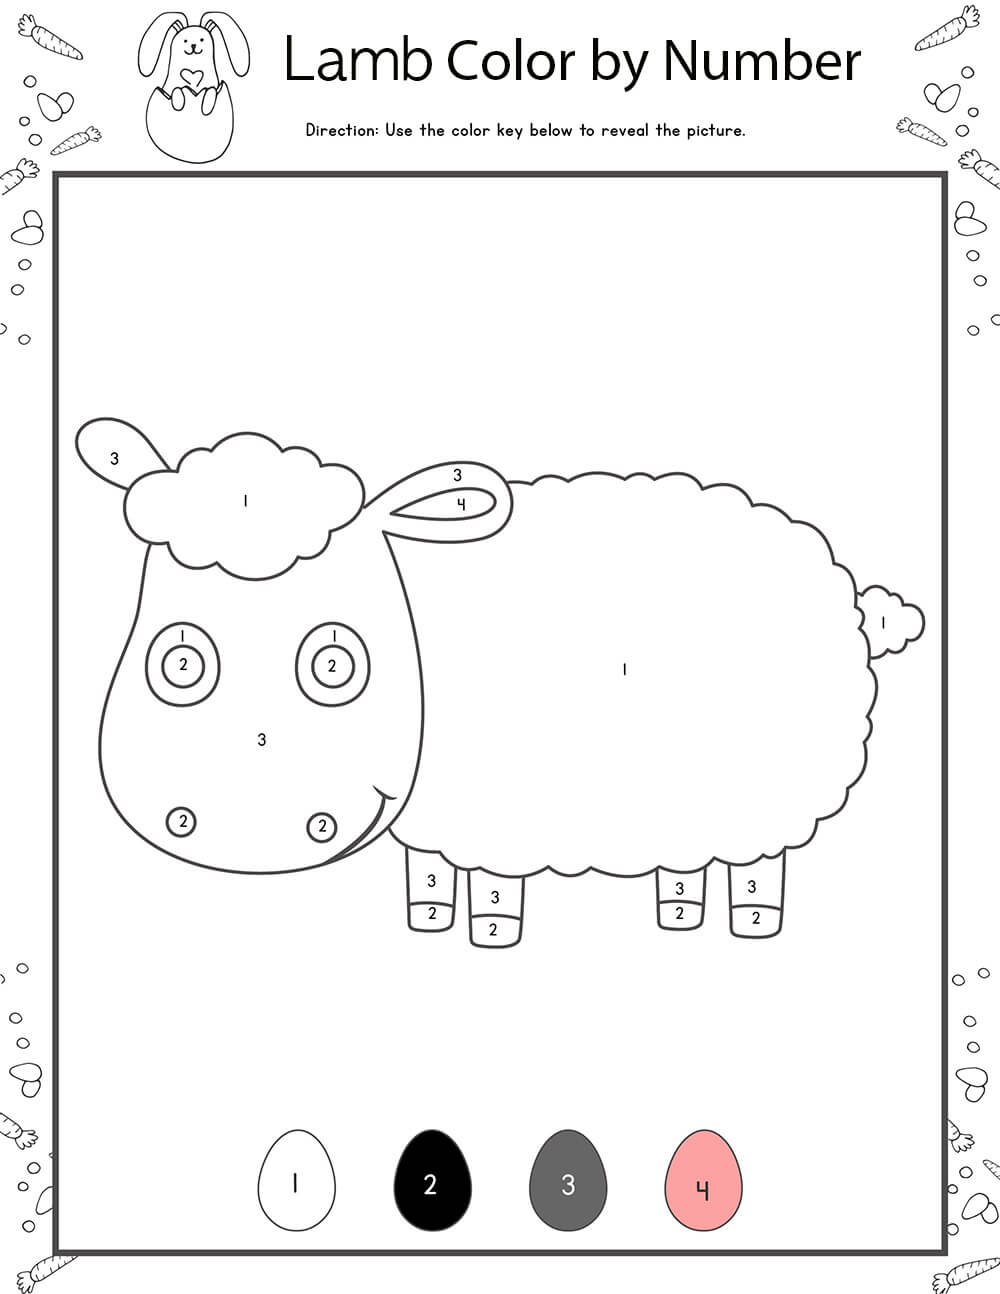 Lamb Color by Number